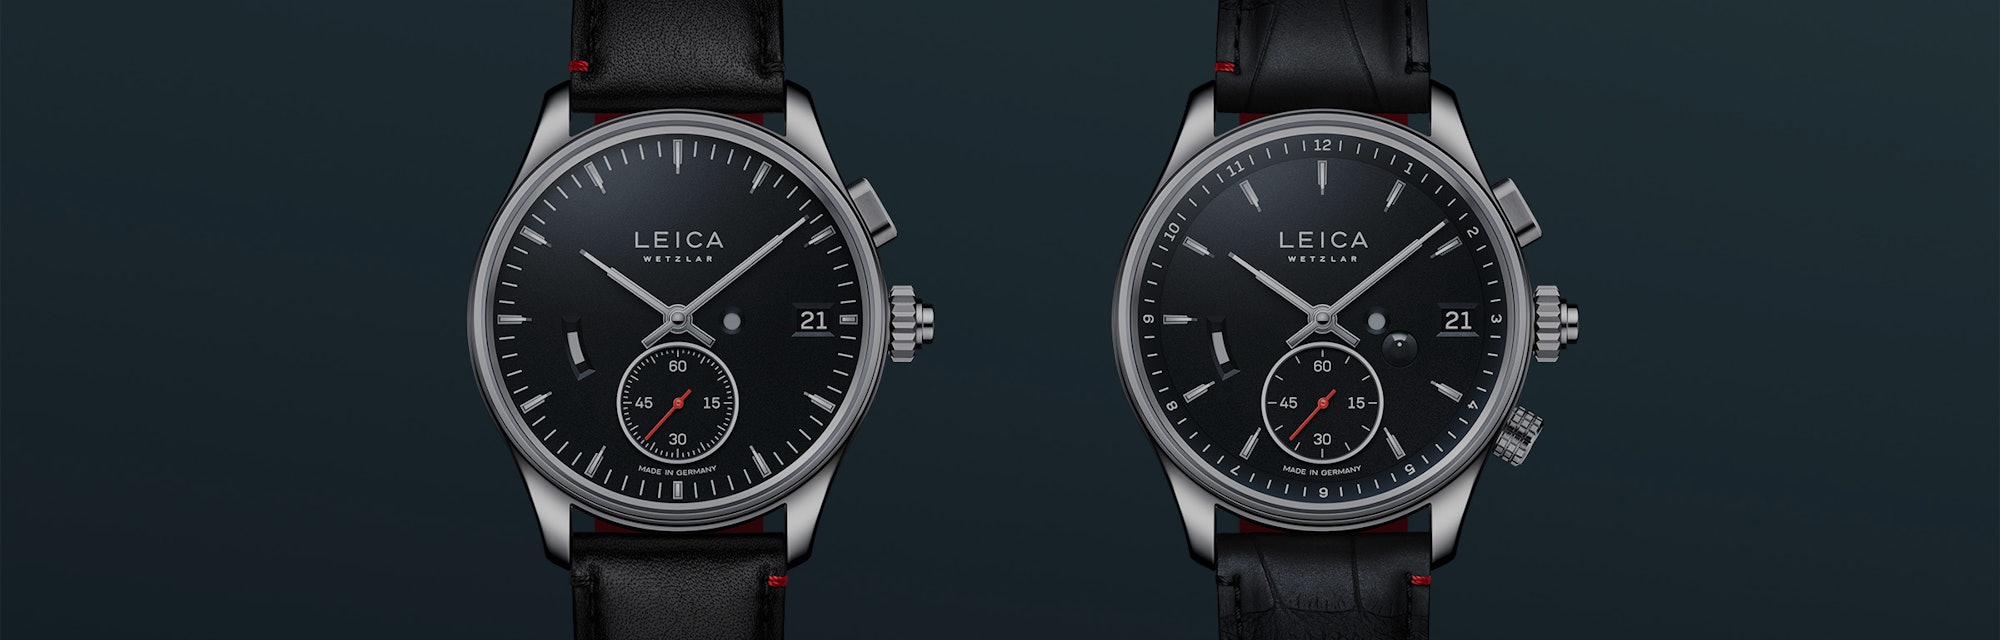 Leica dropped two luxury watches, the L1 and the L2.